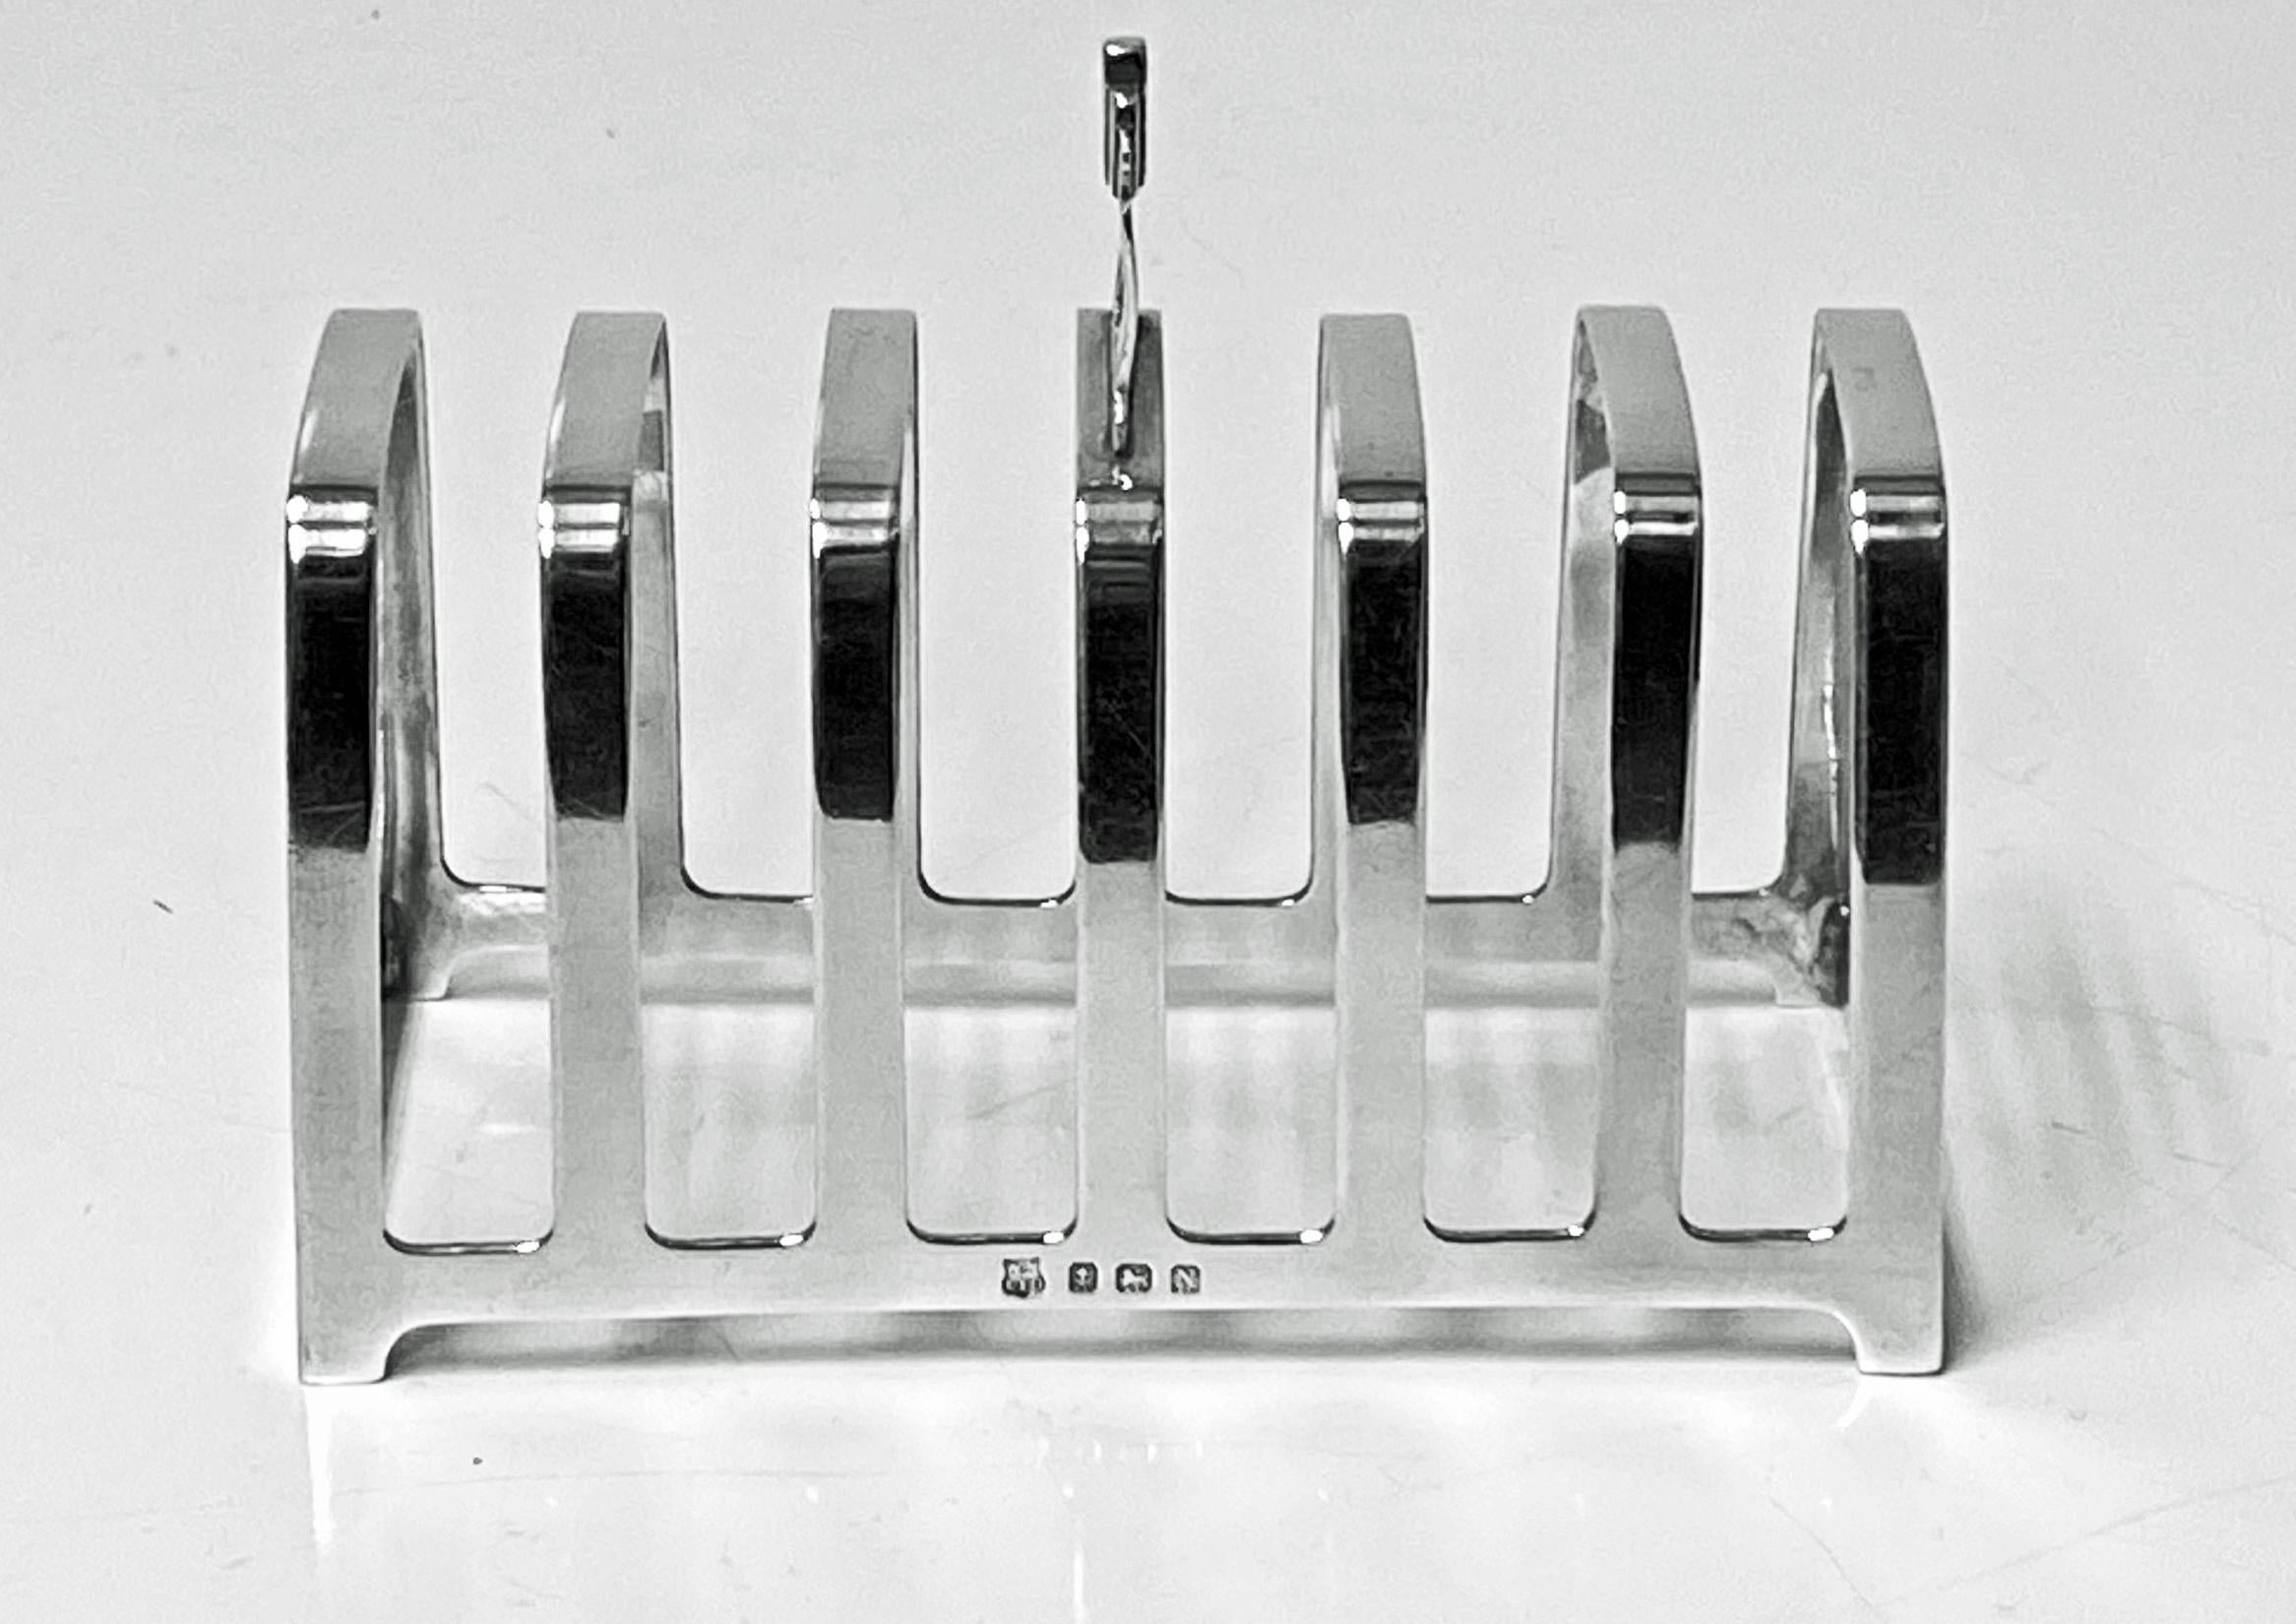 Art Deco English Sterling silver Toast or letter rack, Birmingham 1937 William Neale & Son. The six slice toast rack on rectangular base with stepped arched dividers and odeon arch style handle. Measures: Length: 4.75 inches depth:2.50 inches